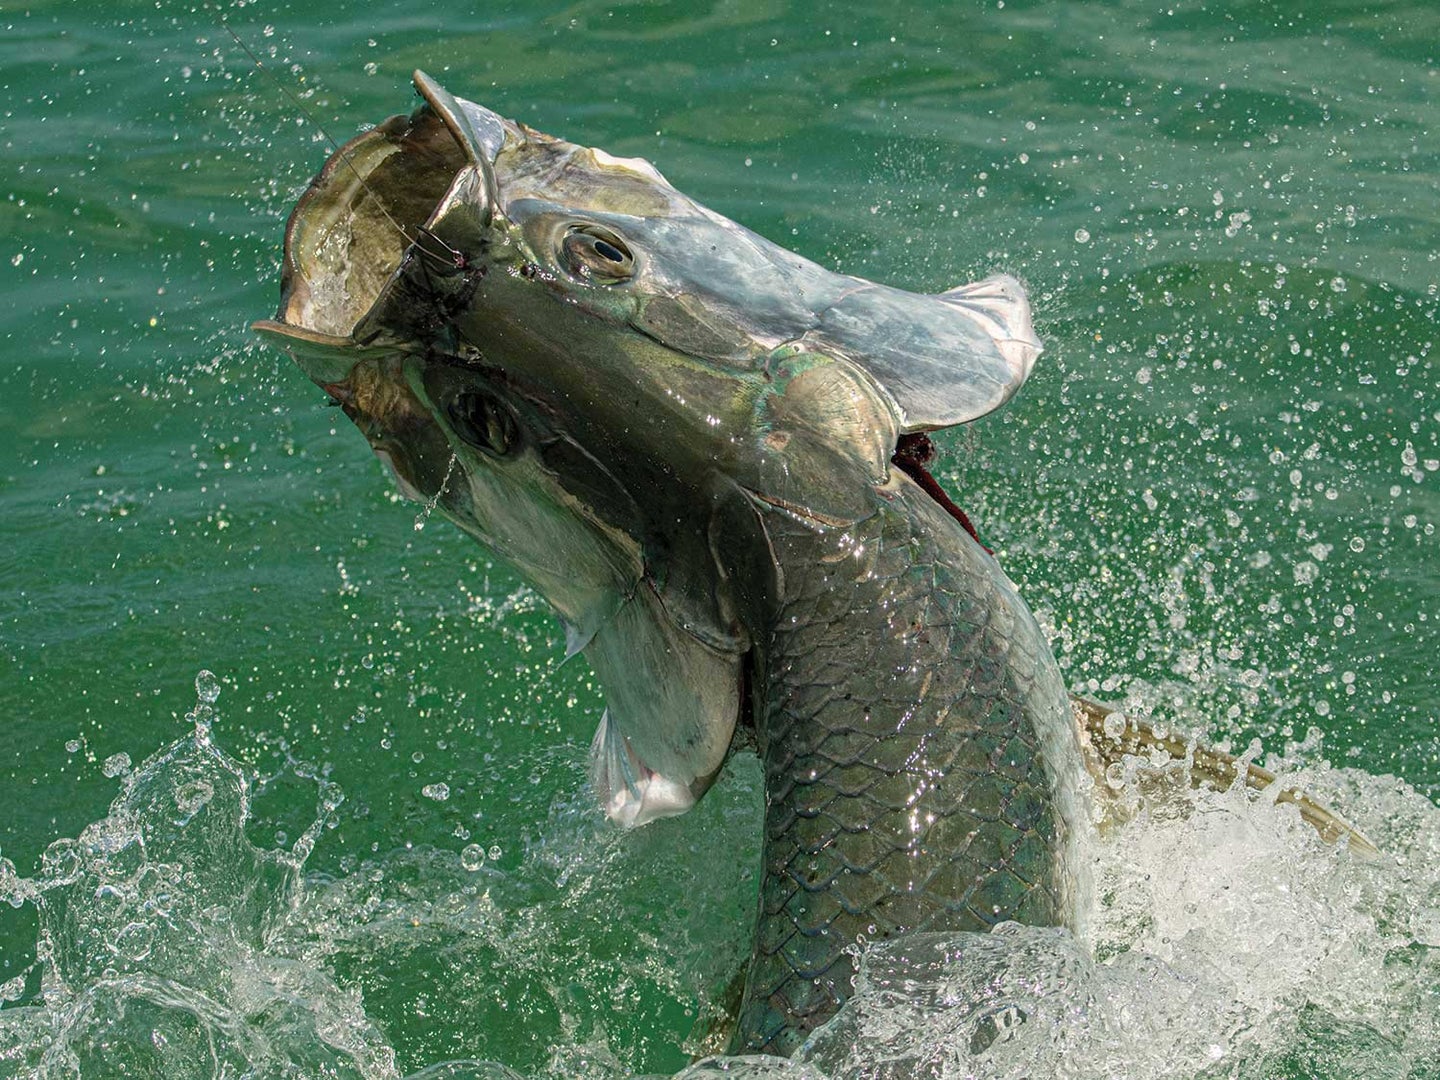 A fish breaking out of the water.